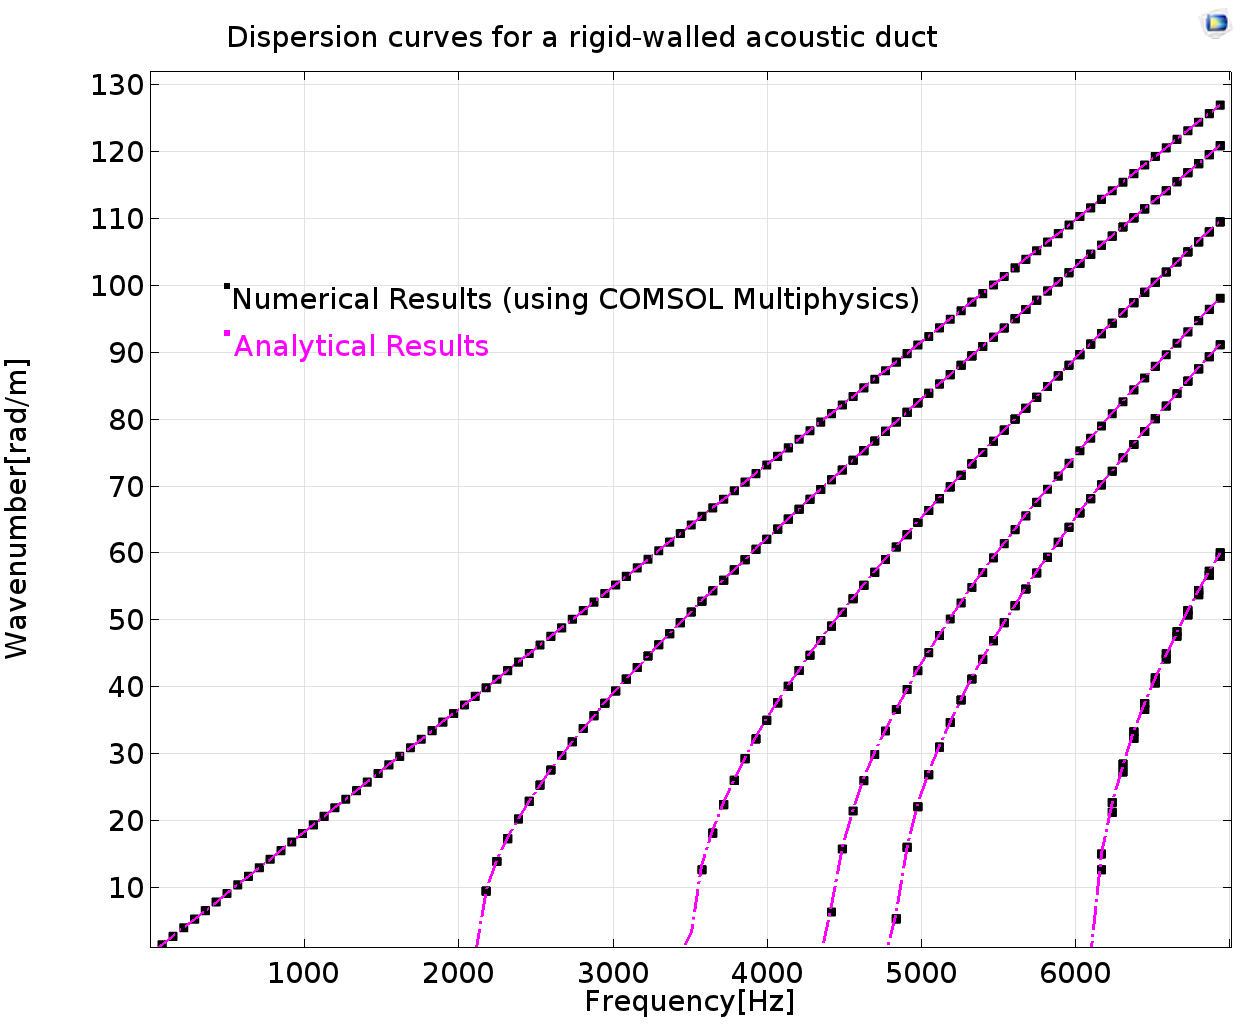 A 1D plot showing dispersion curves for a rigid-walled acoustic duct.